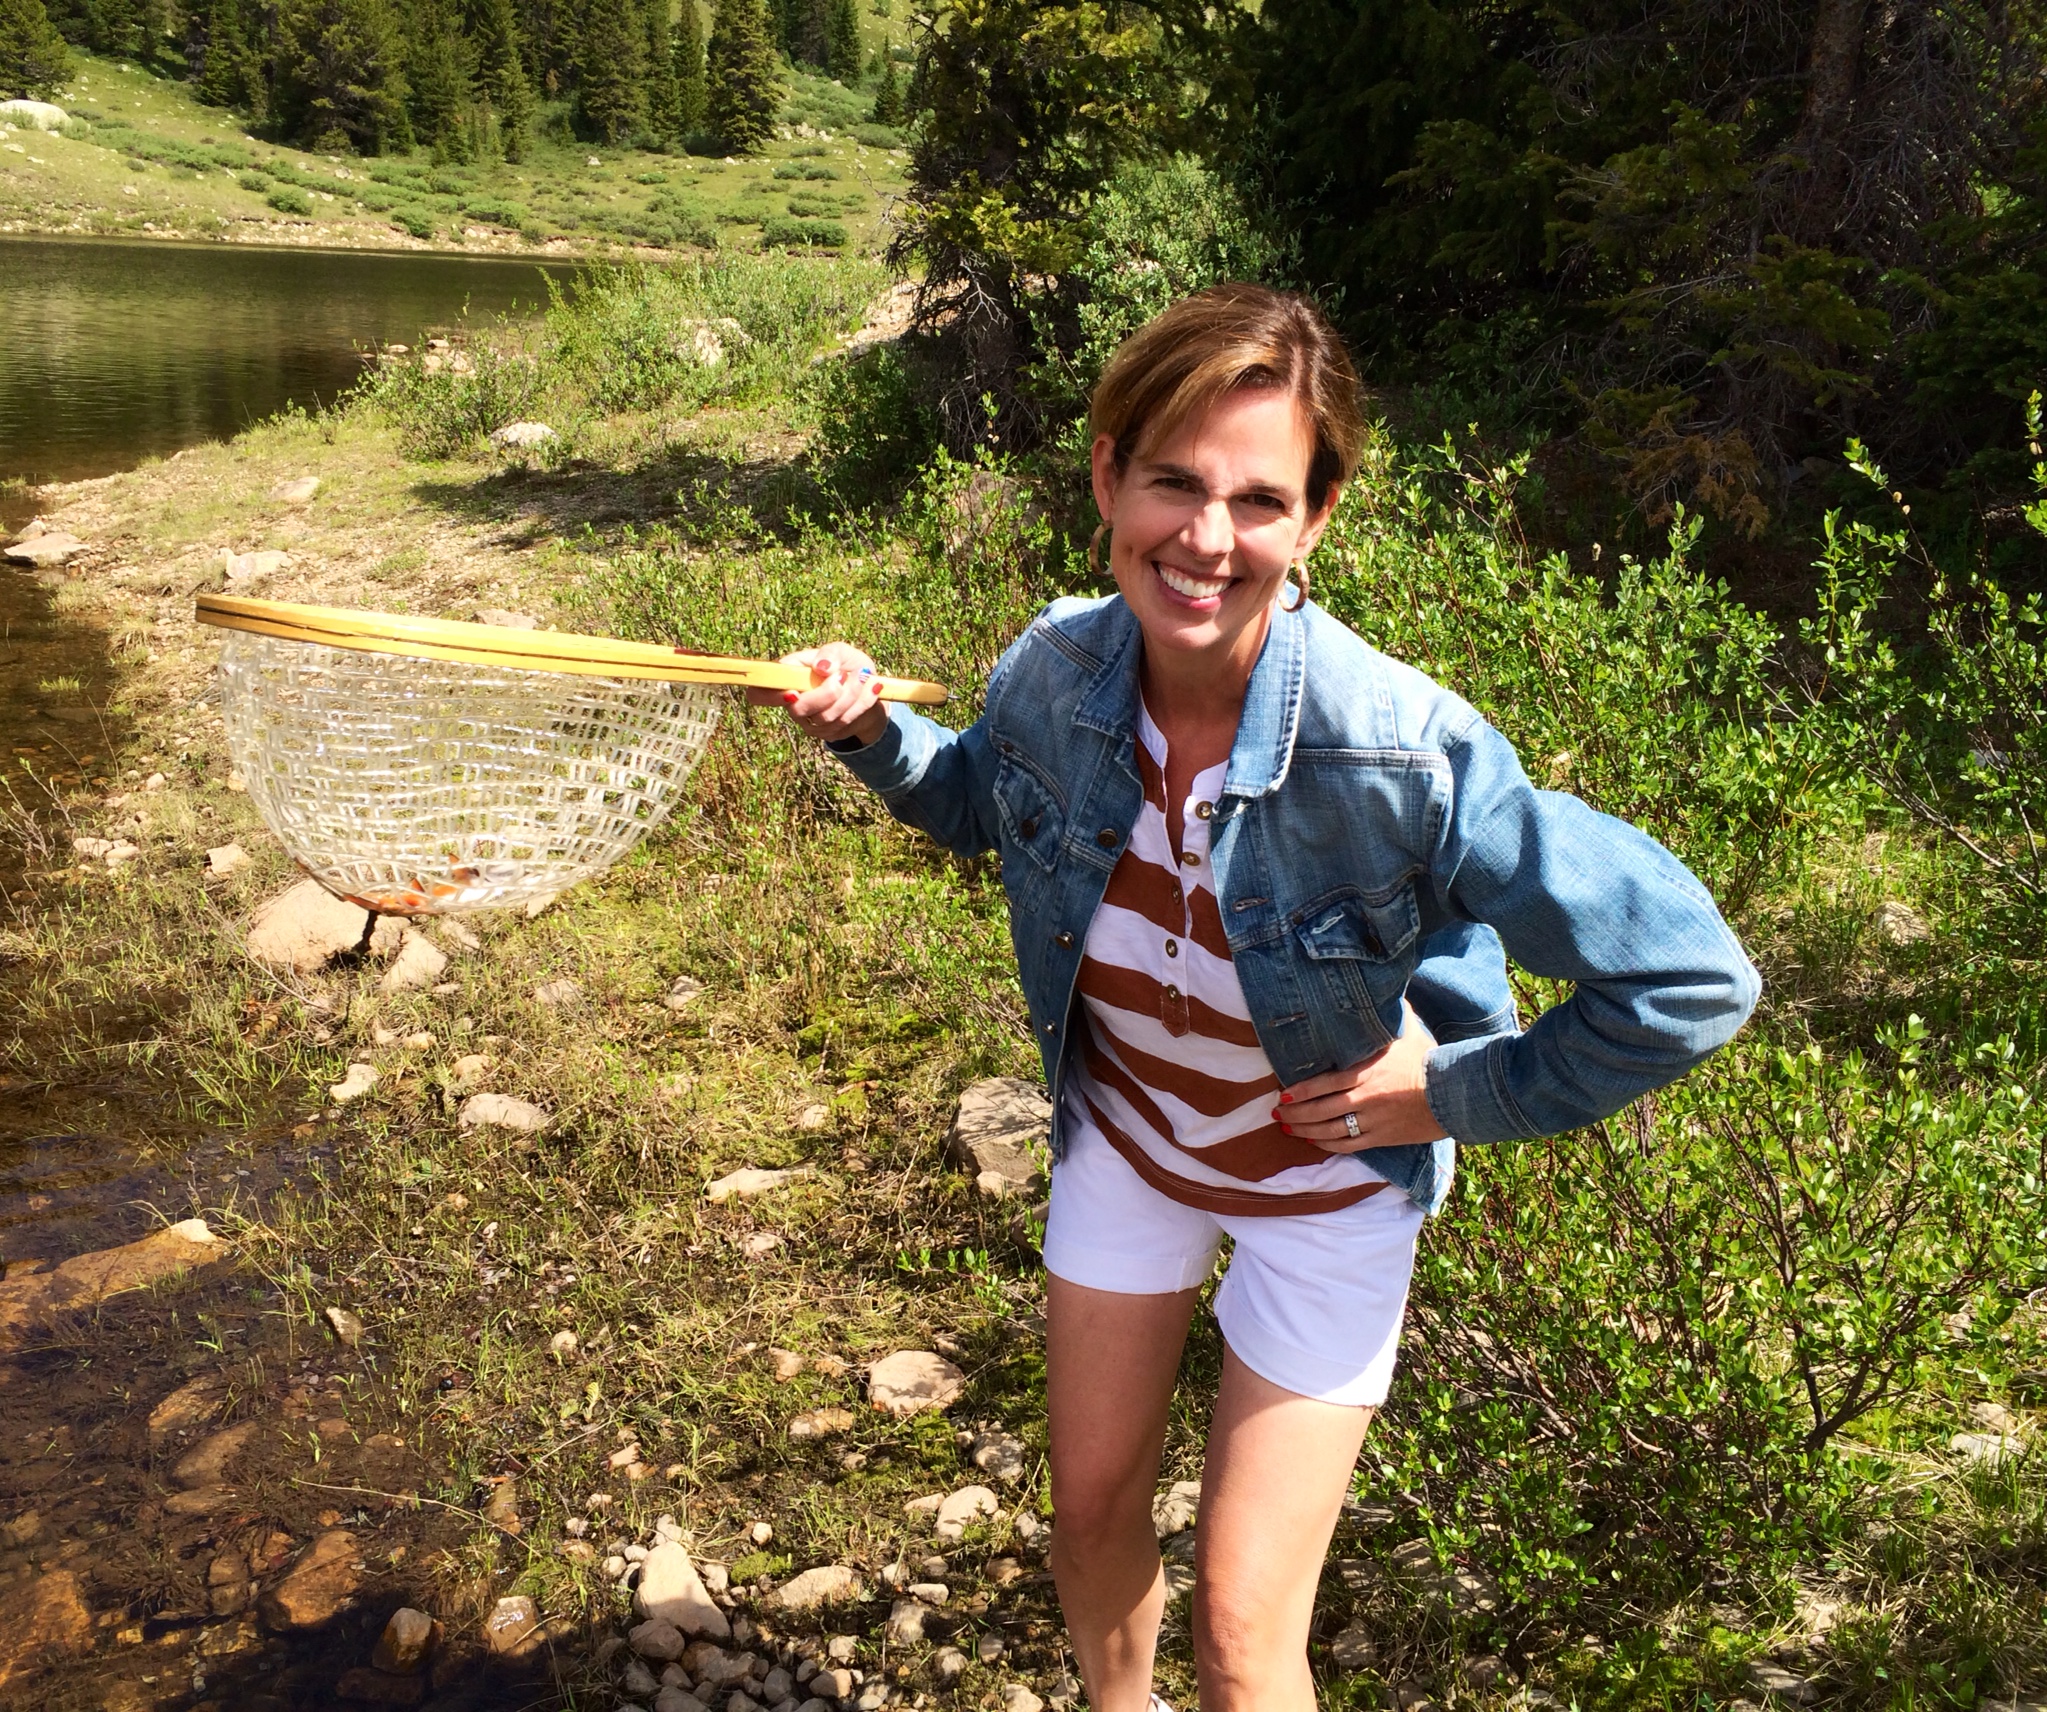 Woman on a fishing excursion in Colorado